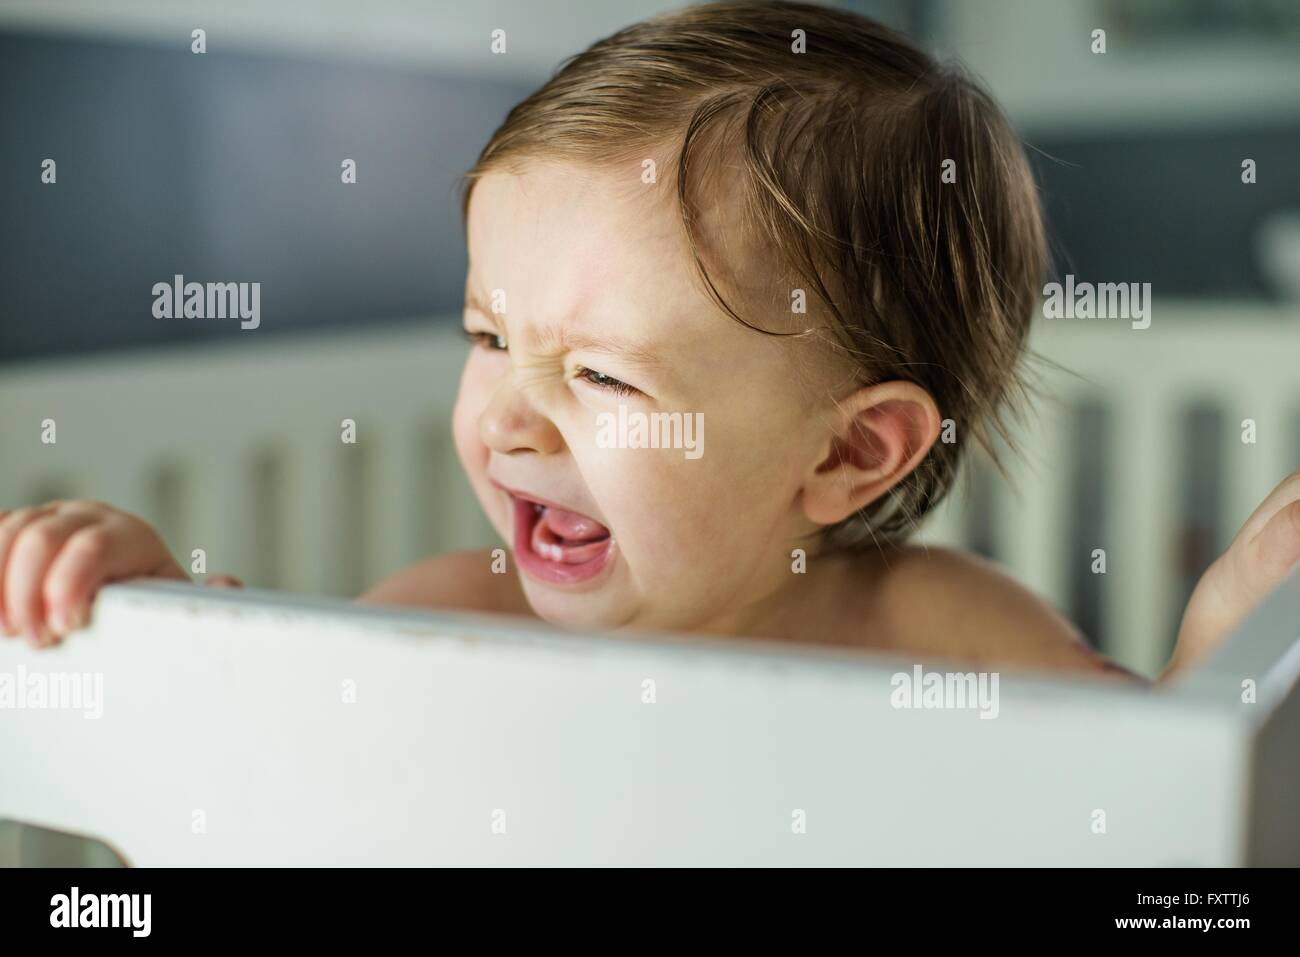 Head and shoulders of baby boy crying in crib Stock Photo